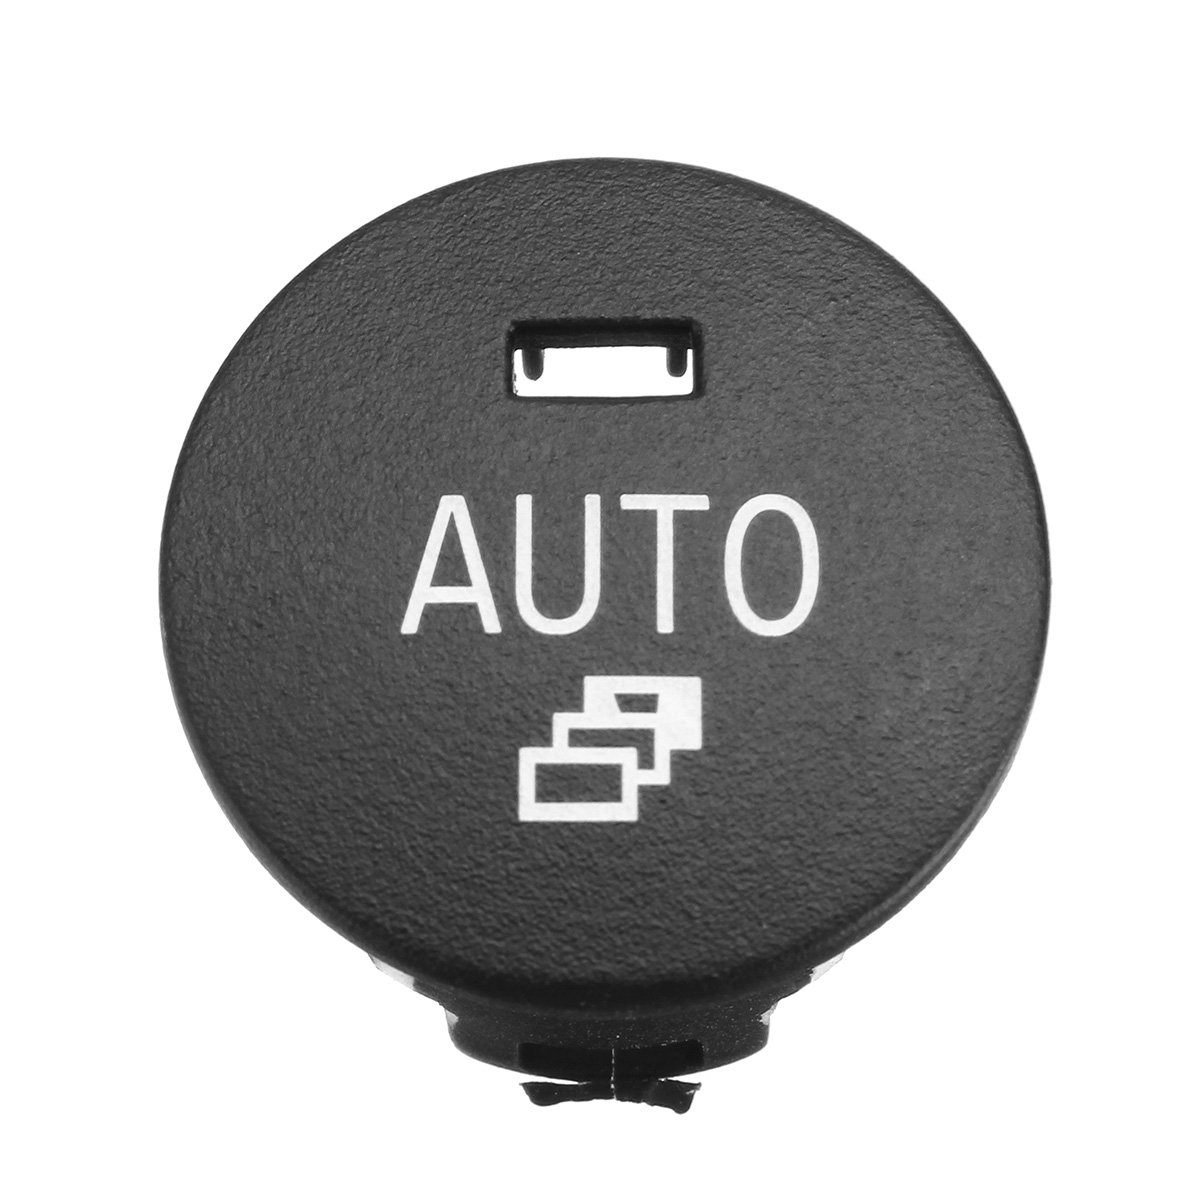 Car Air Conditioner Heater Cooling off Button Repair Cap Cover for BMW 5 Series E60 E61